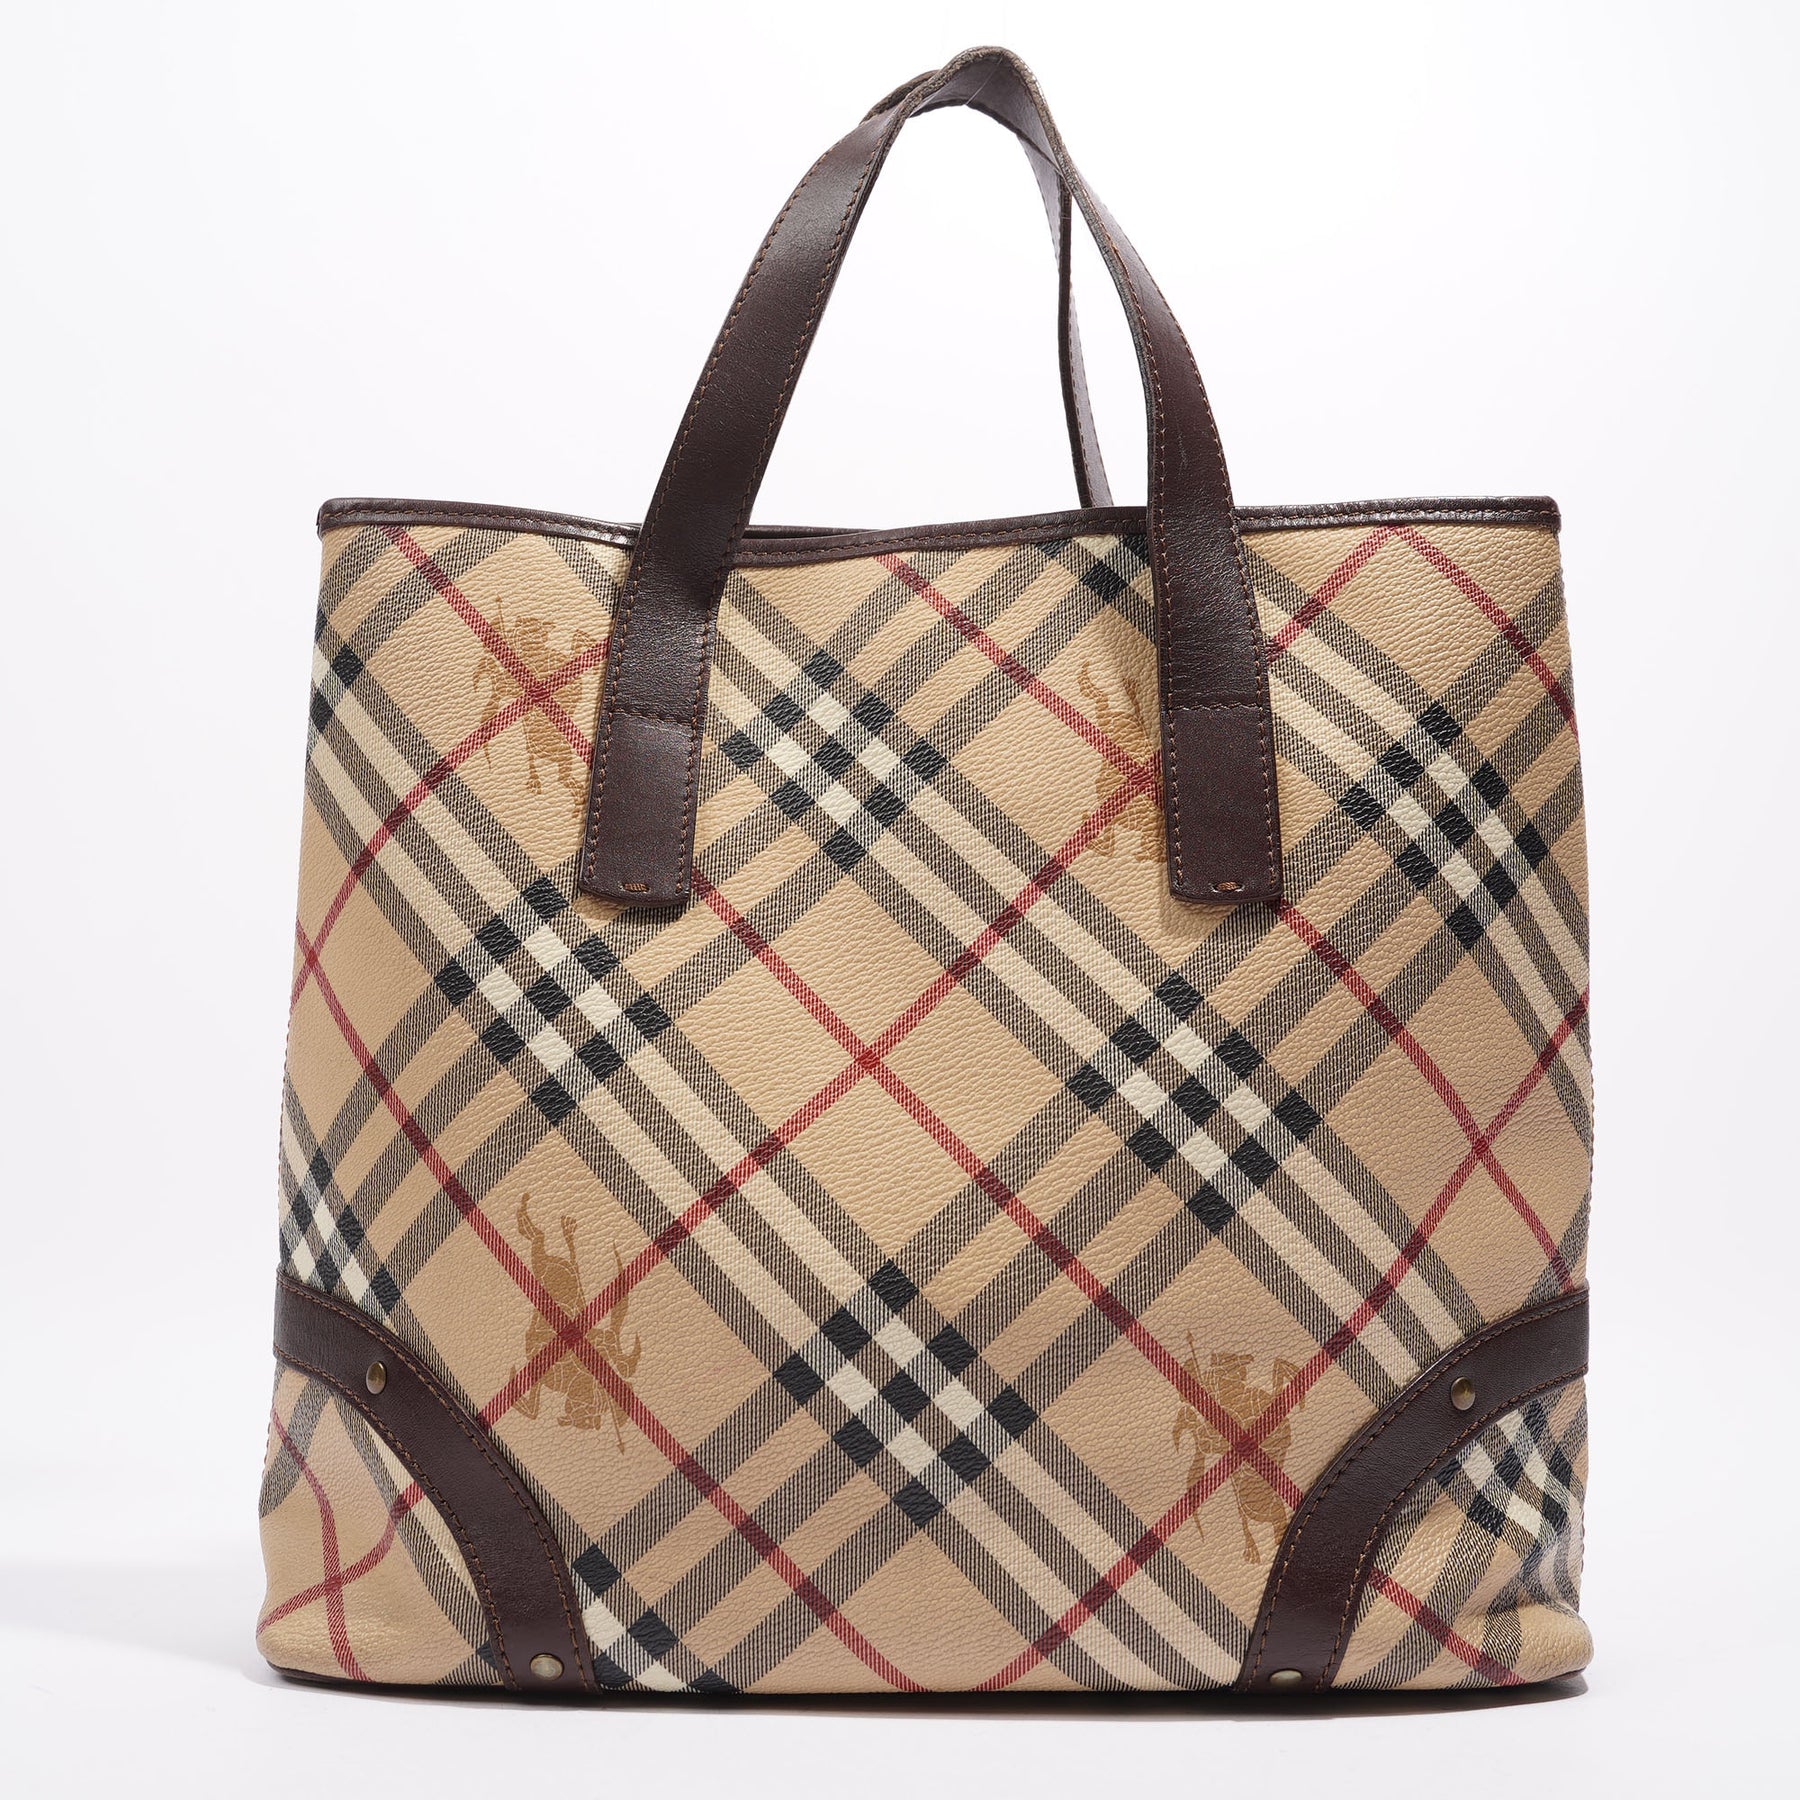 Sold at Auction: BURBERRY CHECK PINK TOTE BAG W/BAG, 18.5IN.